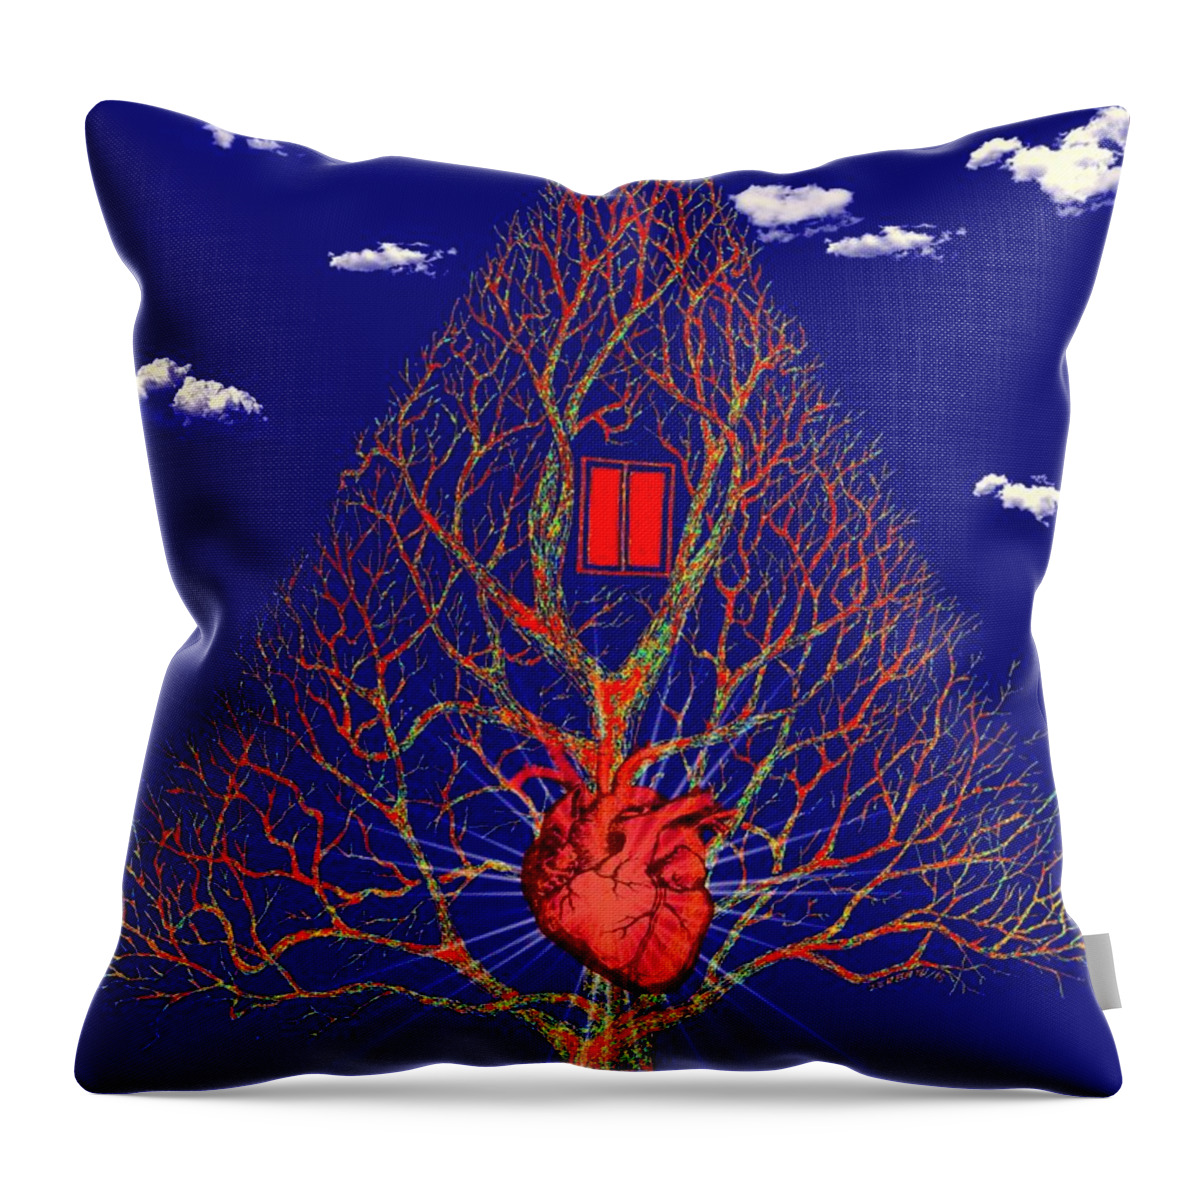 Love Throw Pillow featuring the digital art Heart Is The Abode Of The Spirit by Paulo Zerbato